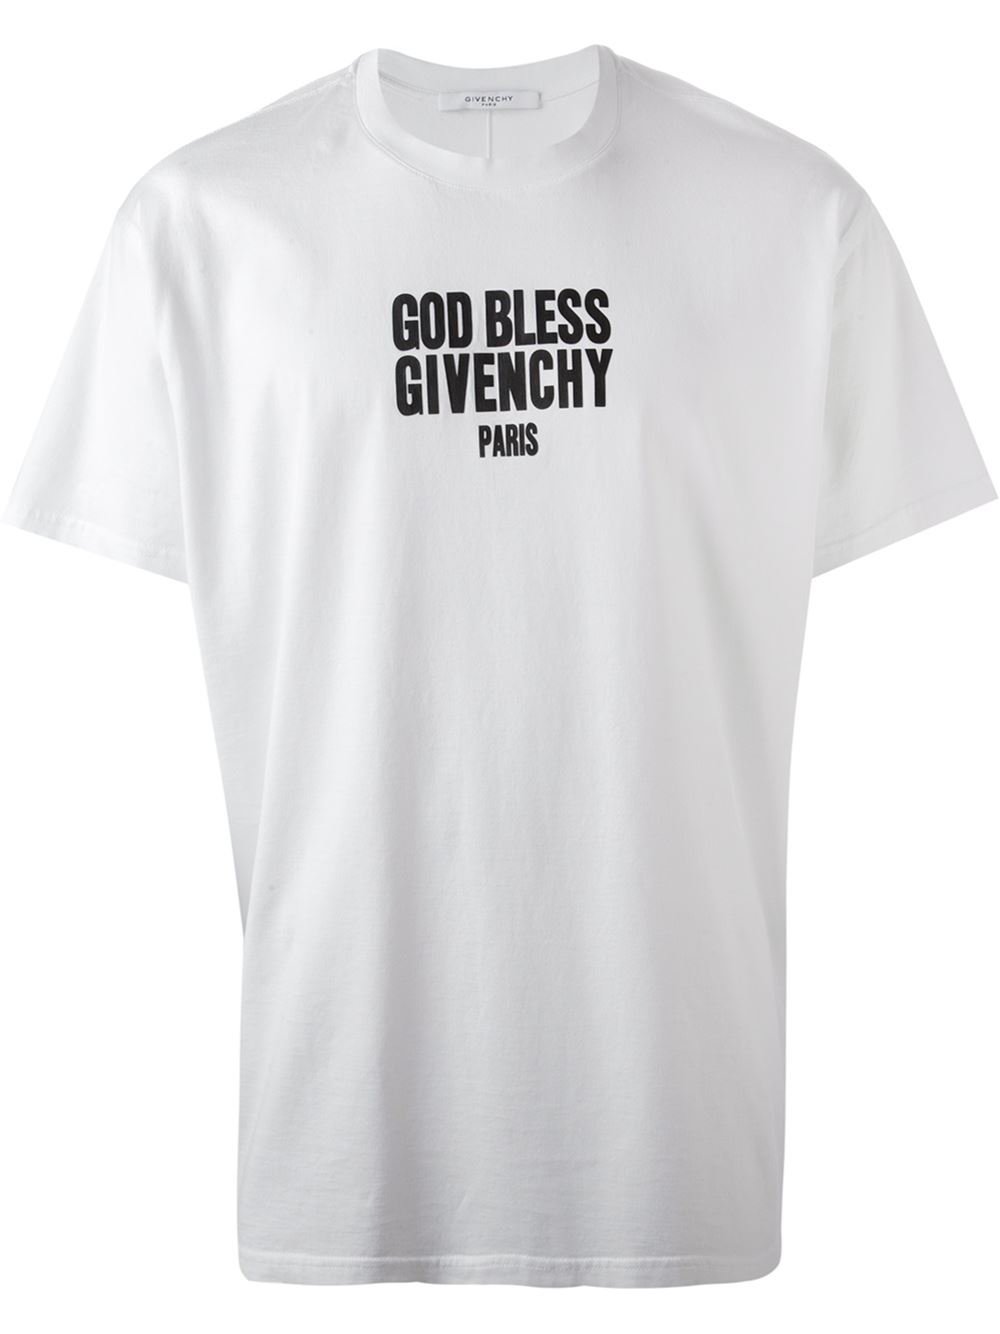 Lyst - Givenchy God Bless Cotton T-shirt in White for Men